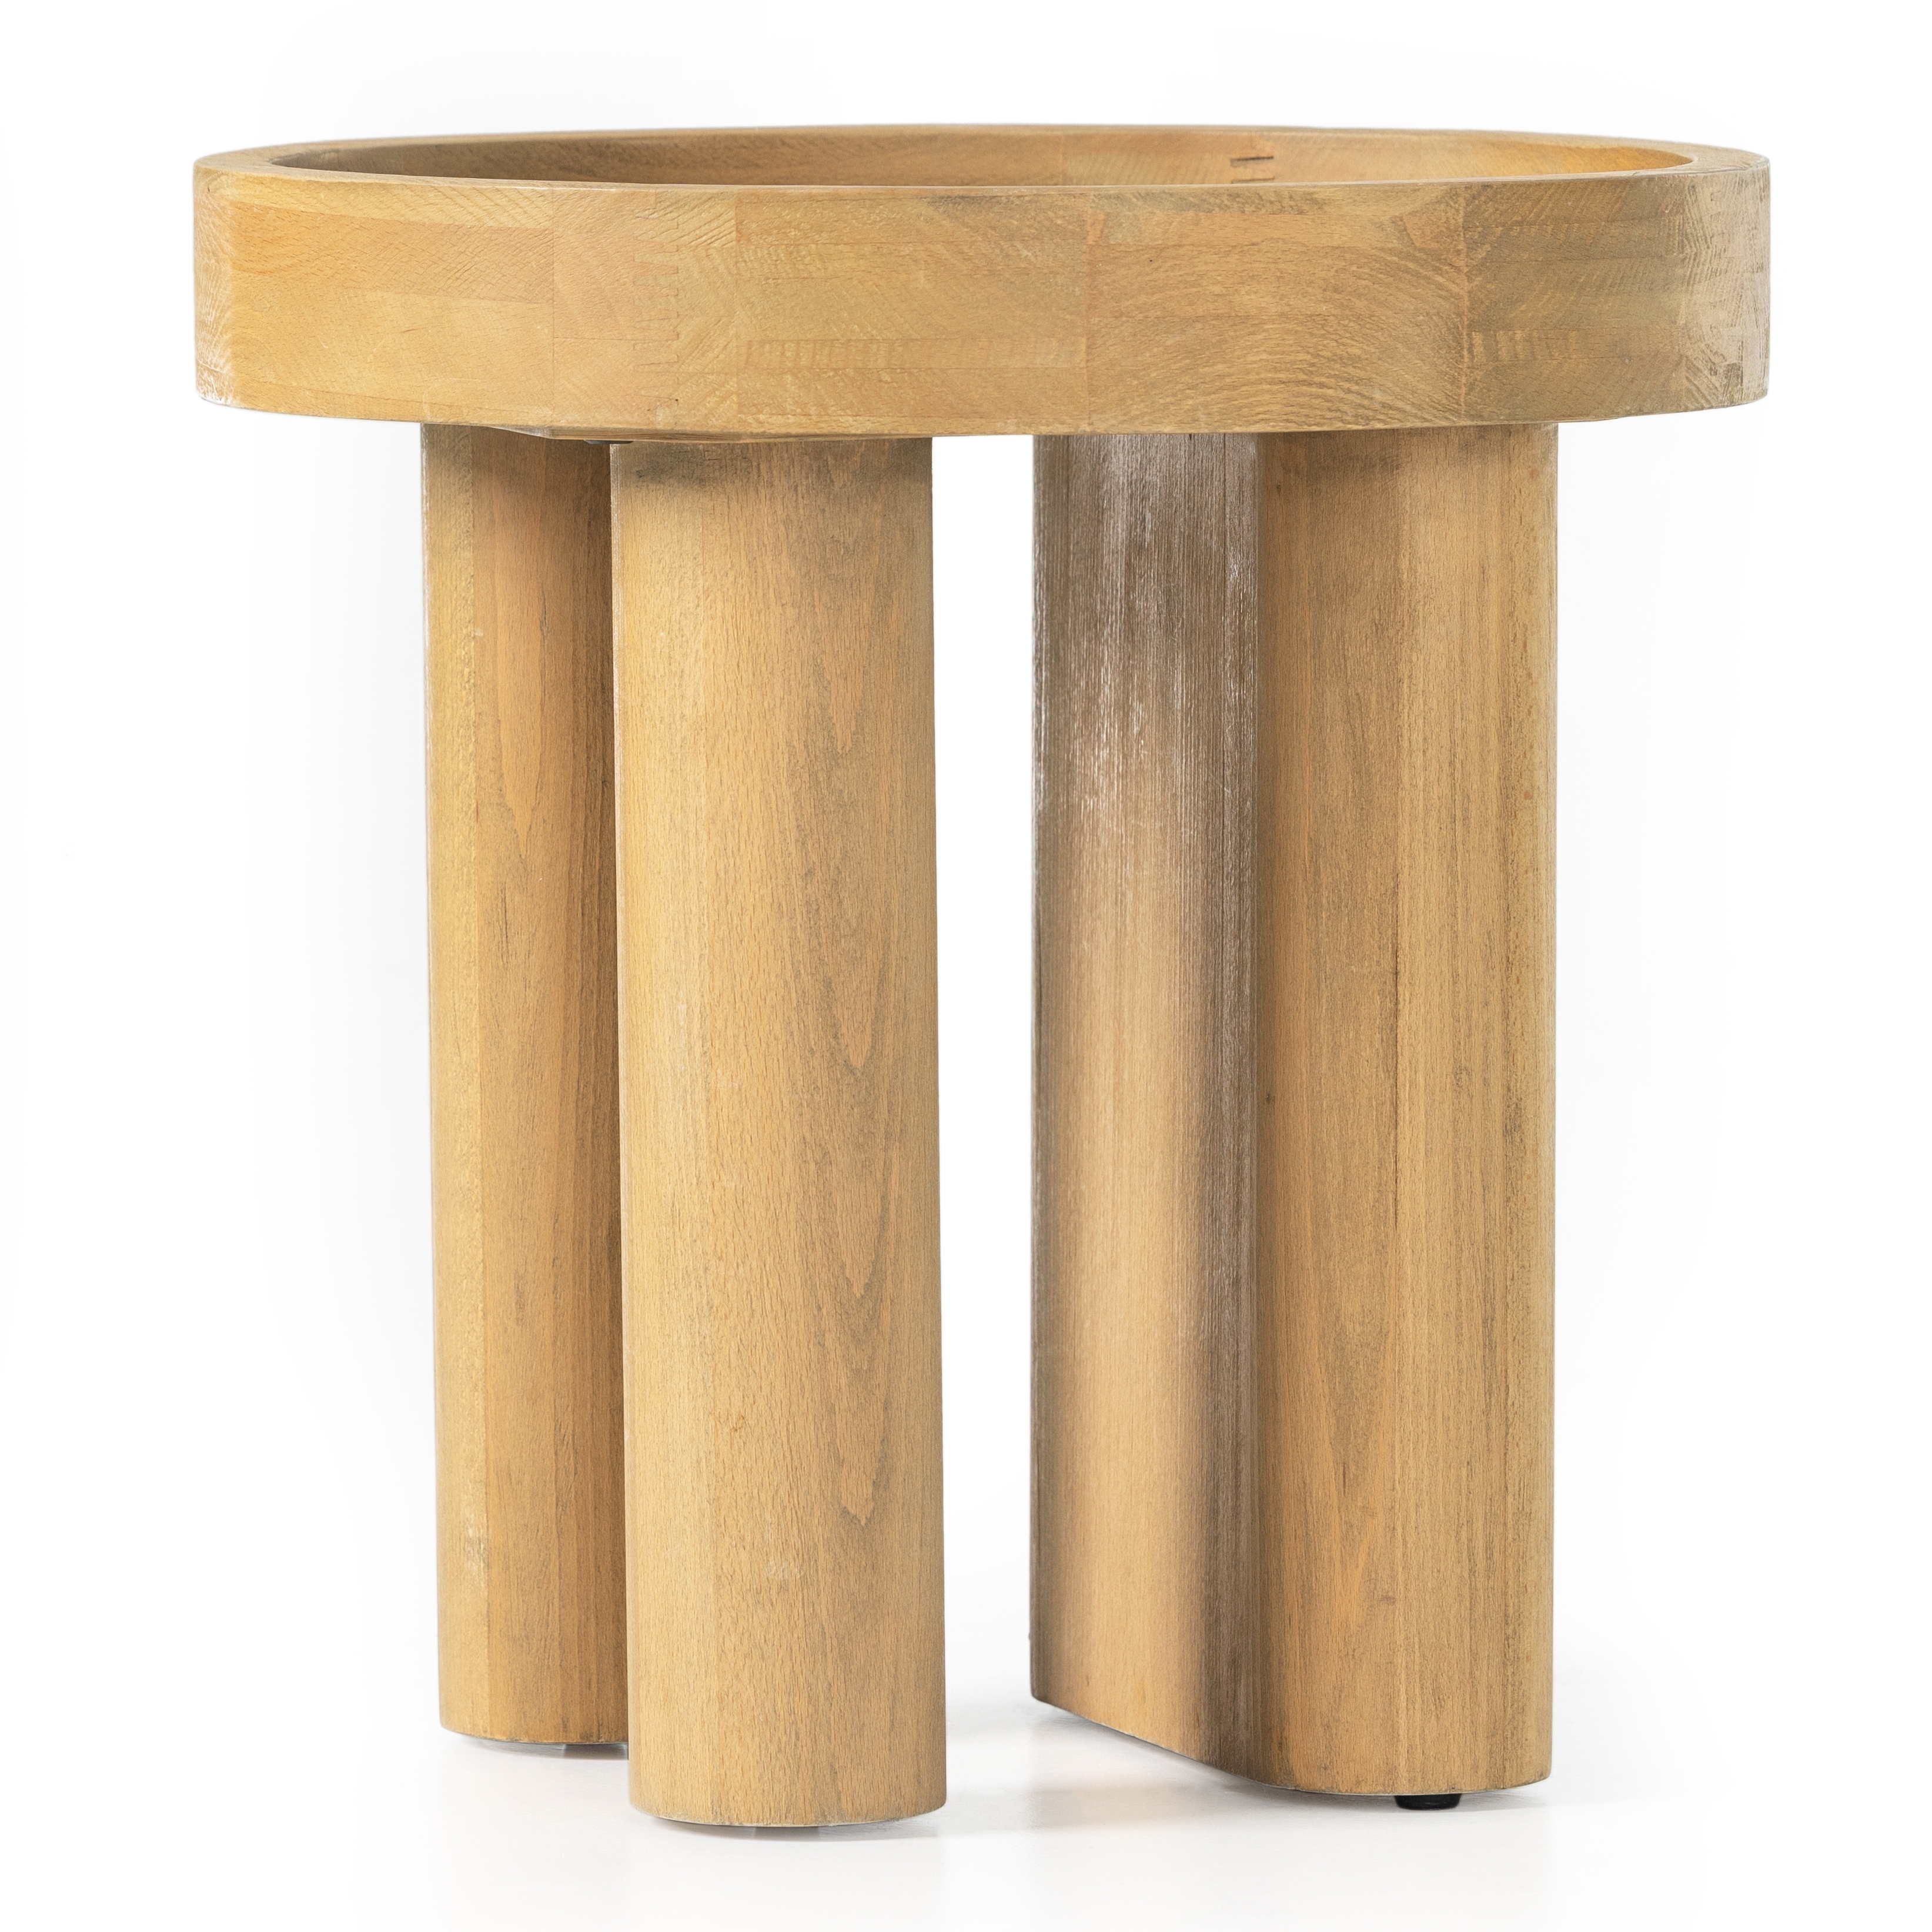 Schwell End Table-Natural Beech - Image 4